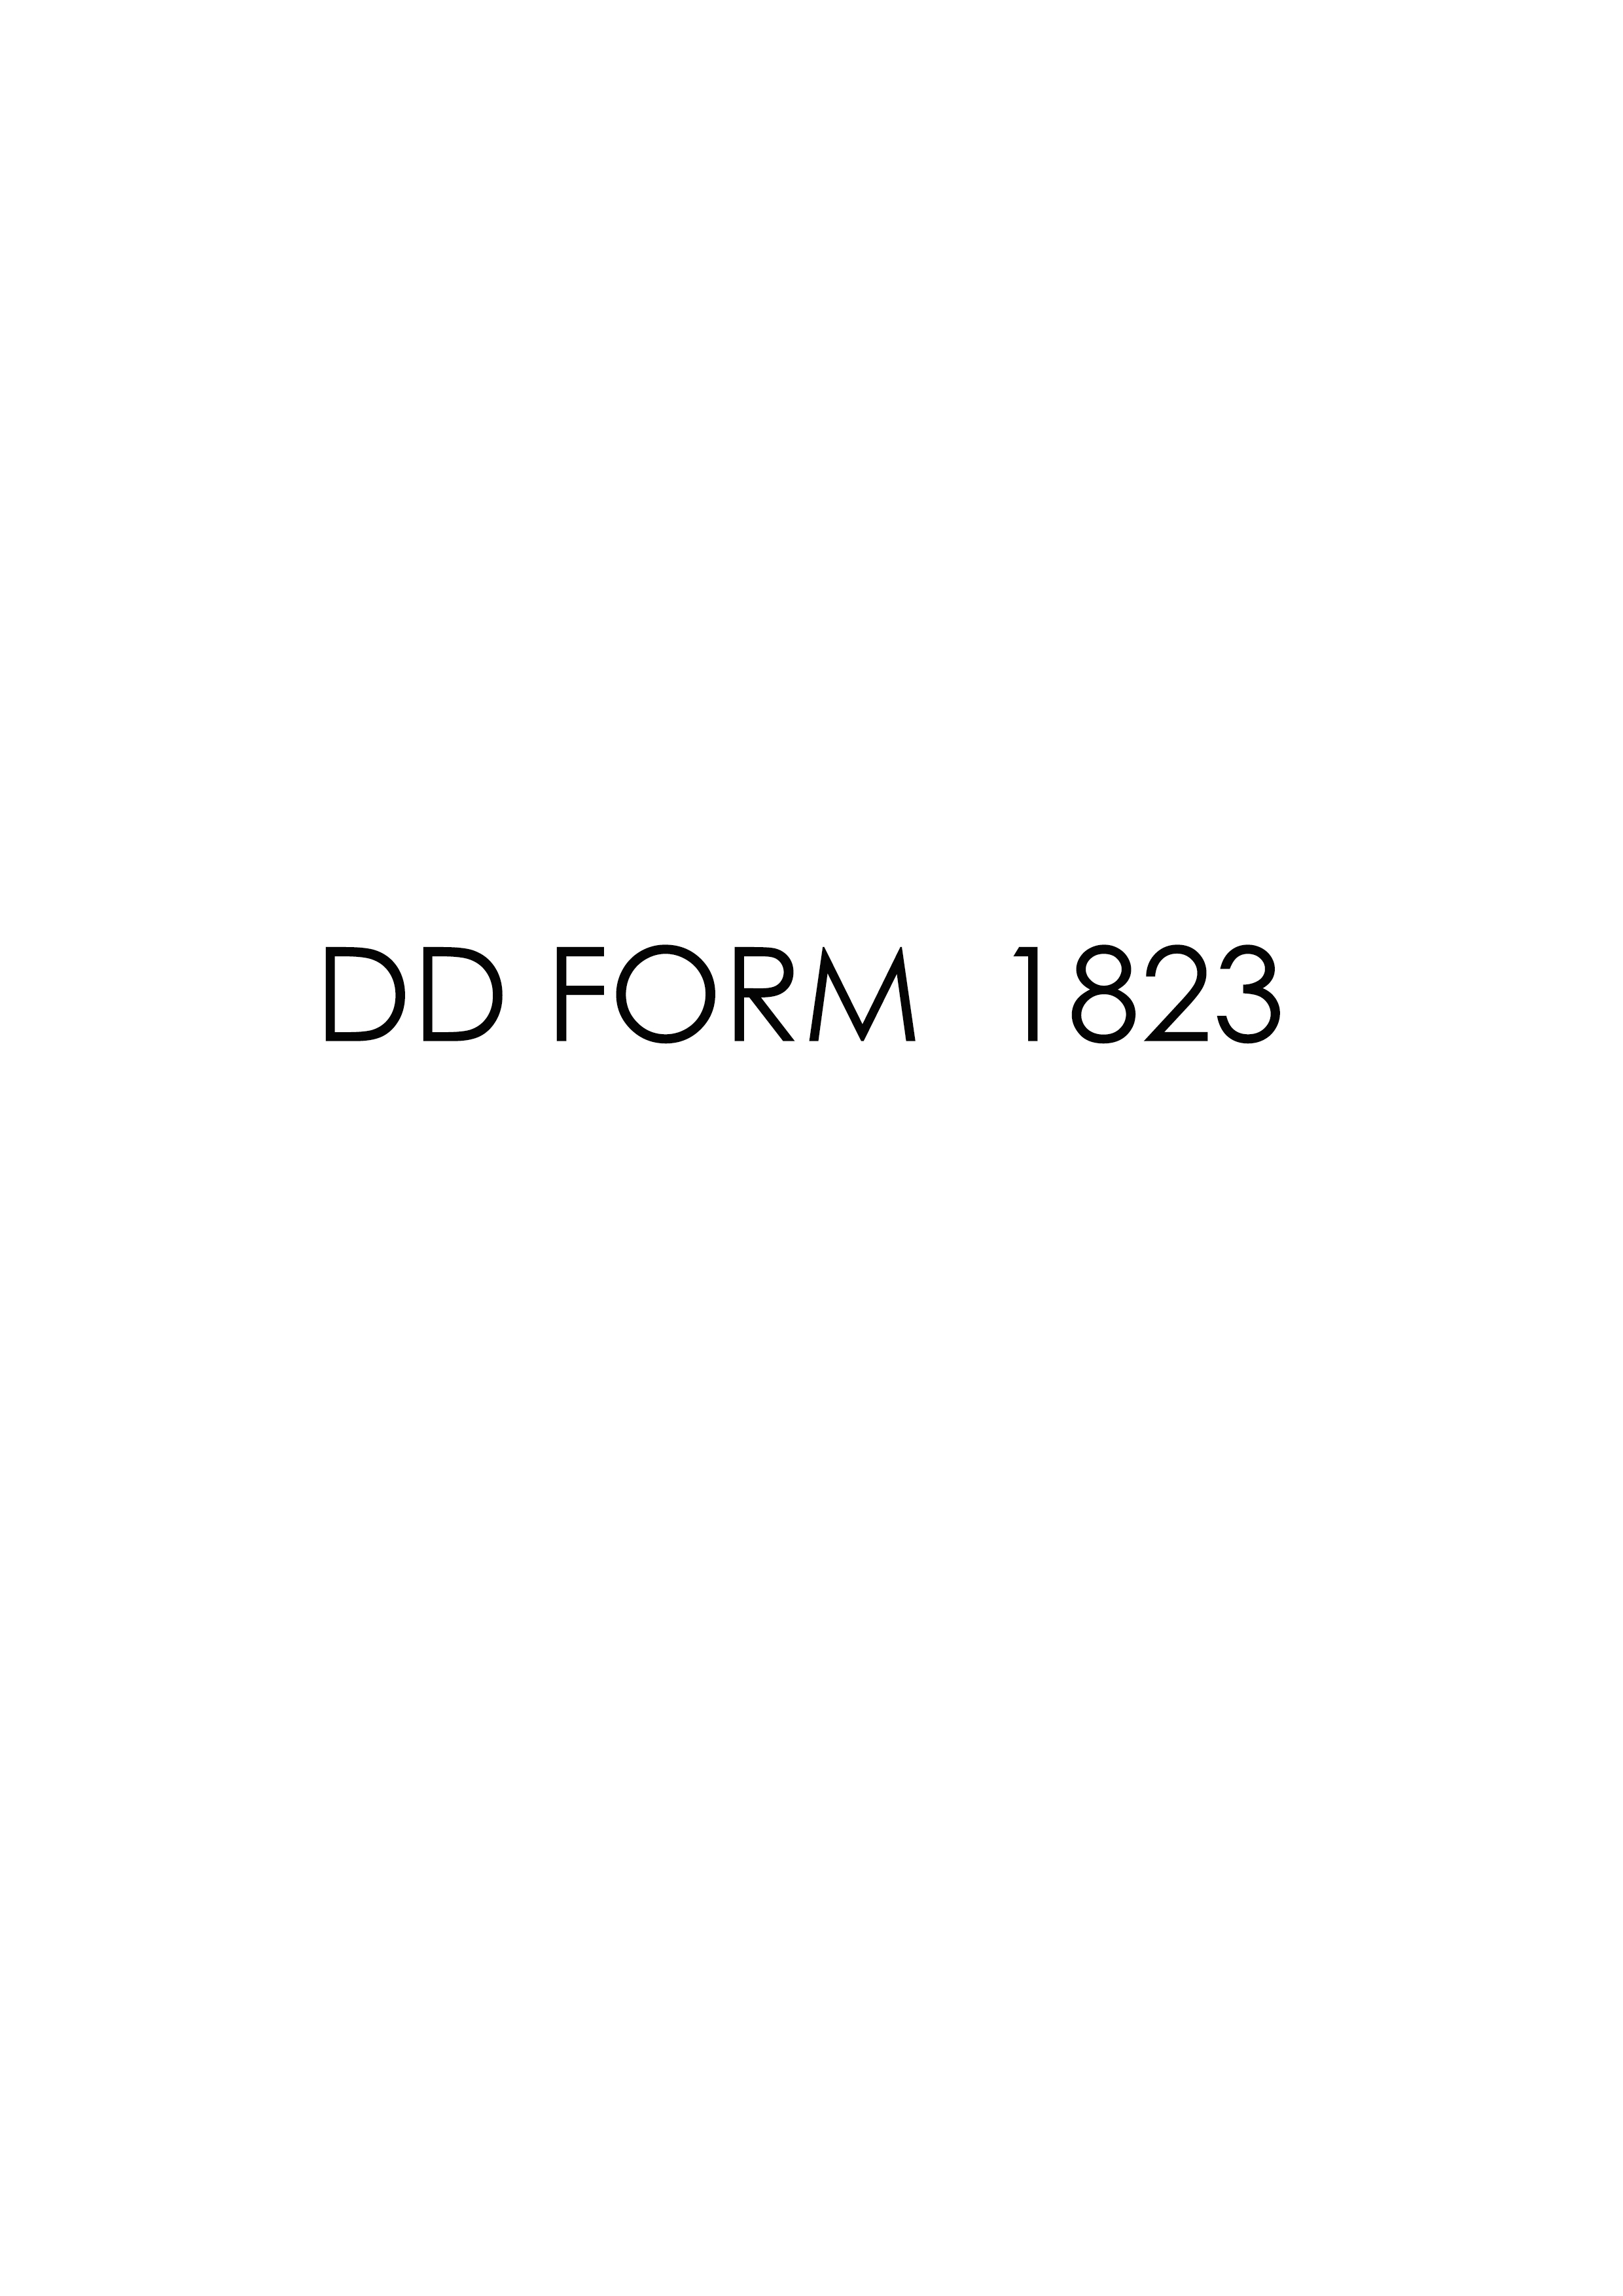 Download Fillable dd Form 1823